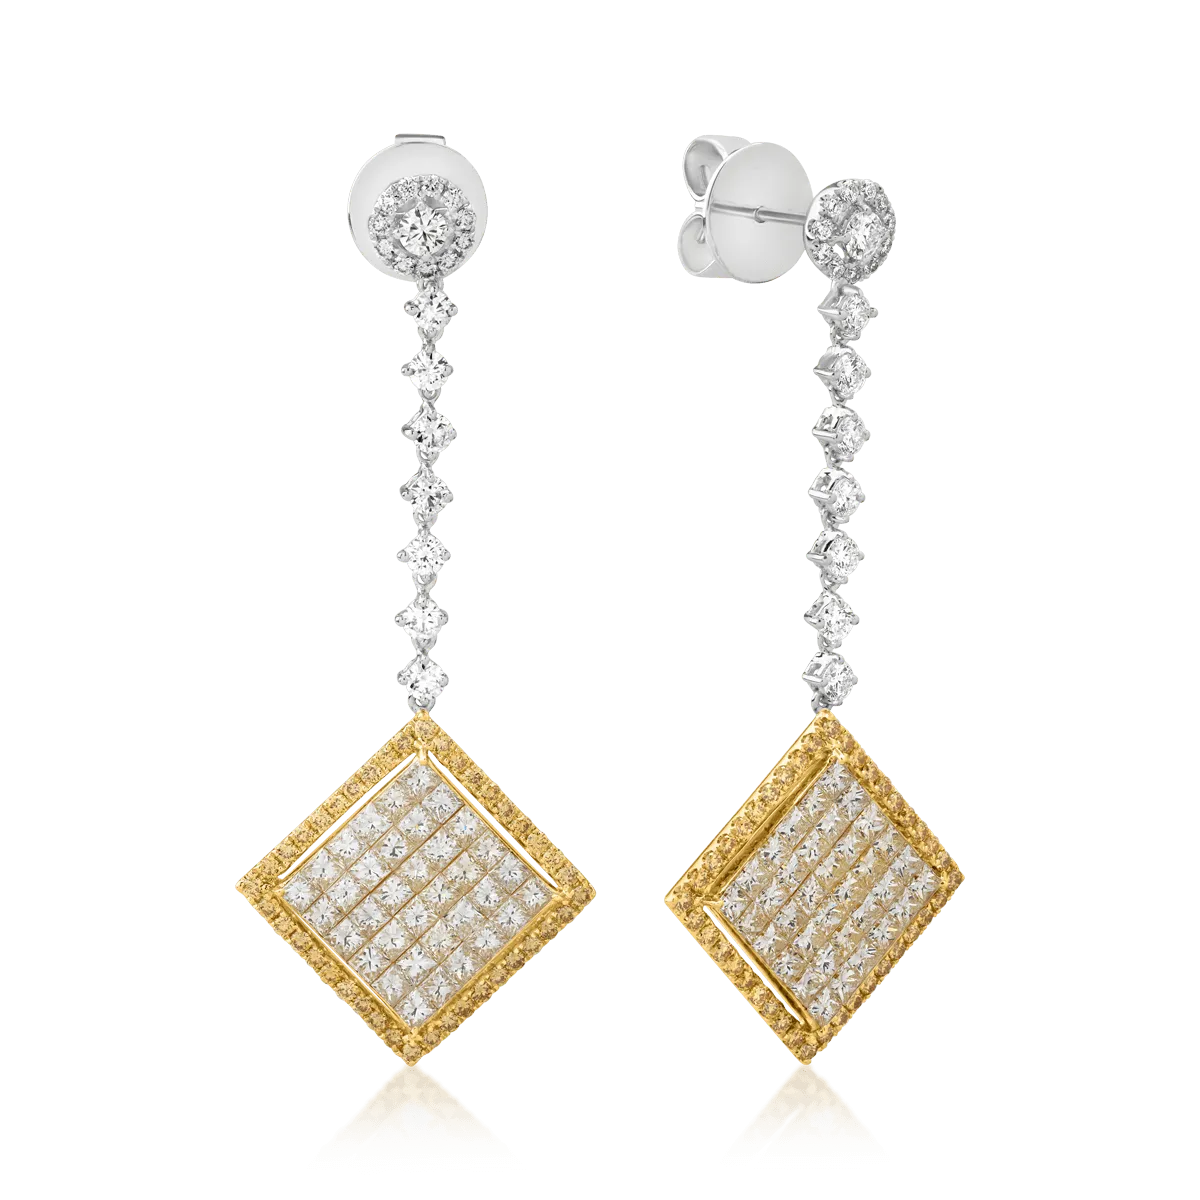 18K white-yellow gold earrings with 3.43ct colored diamonds and 0.95ct clear diamonds